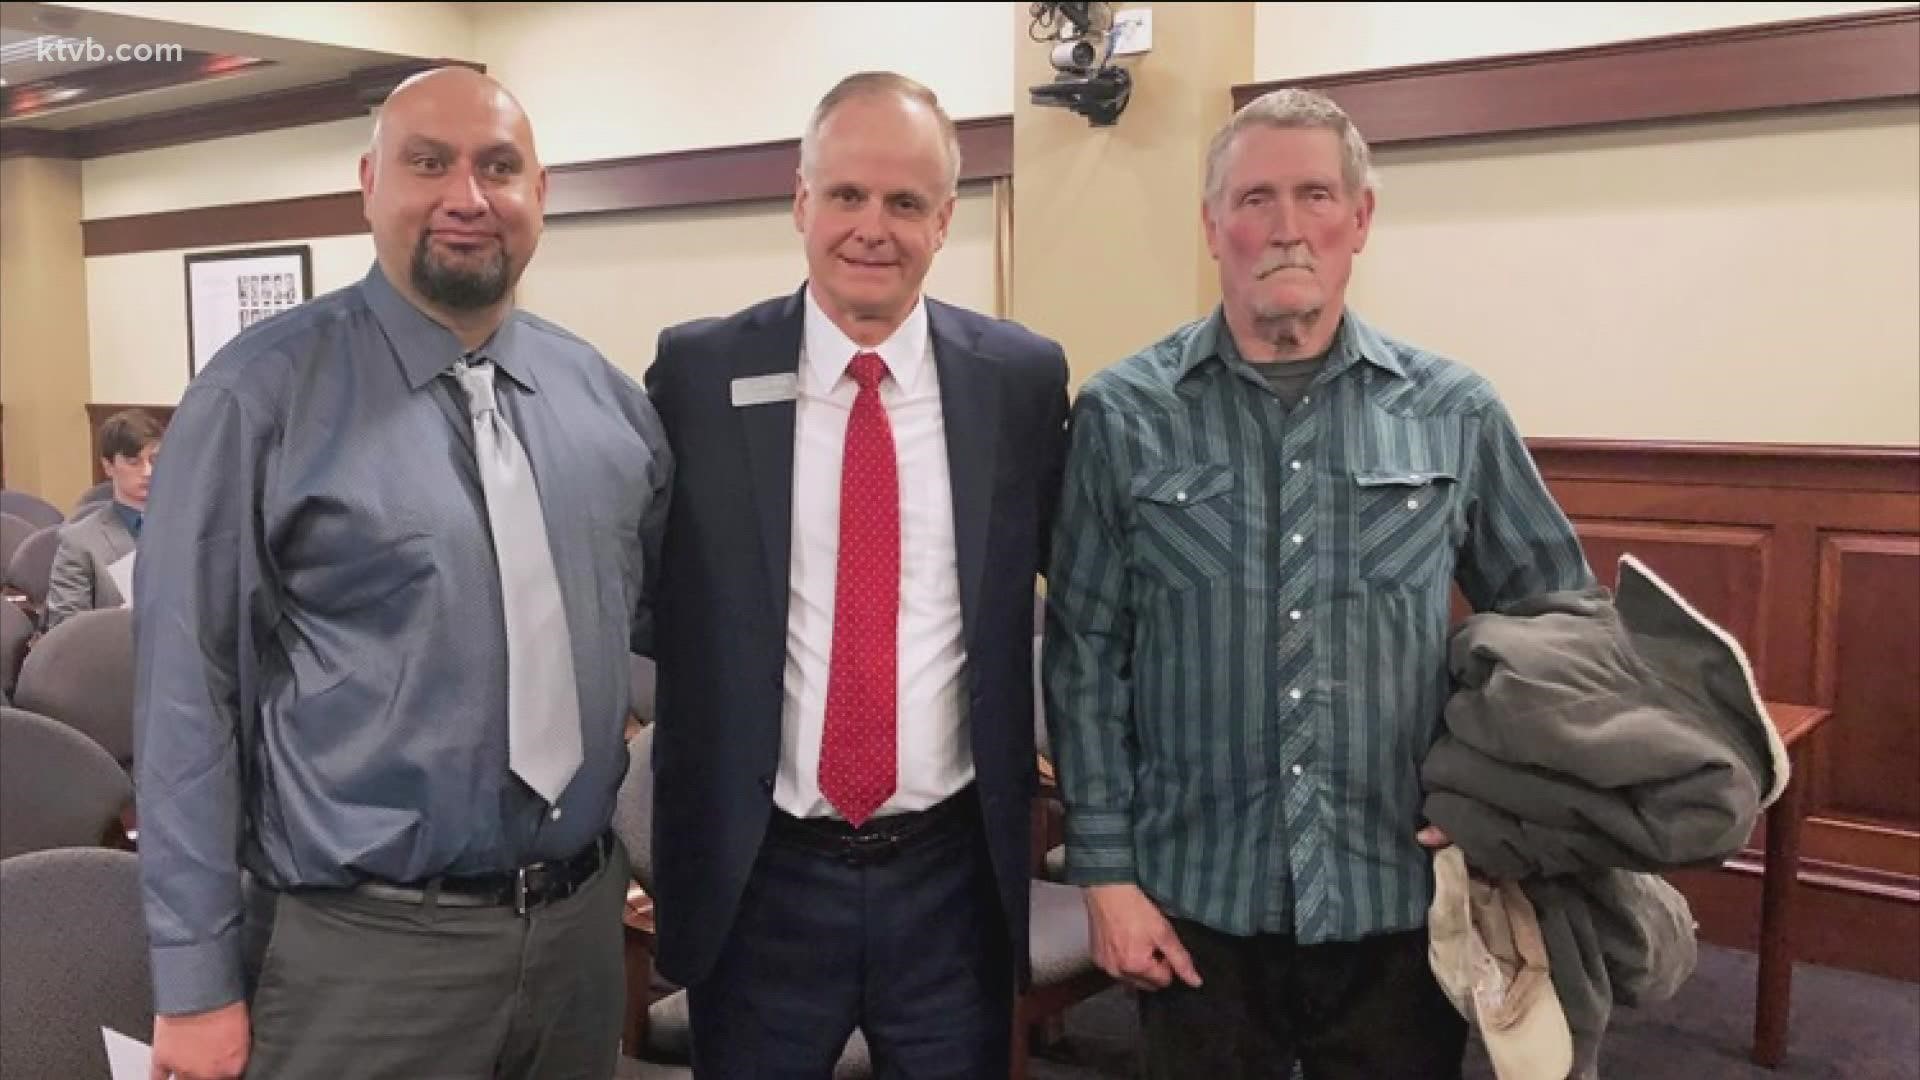 The Idaho Falls City Council voted to accept the settlement agreement with Christopher Tapp, who spent about two decades in prison after being wrongfully convicted.